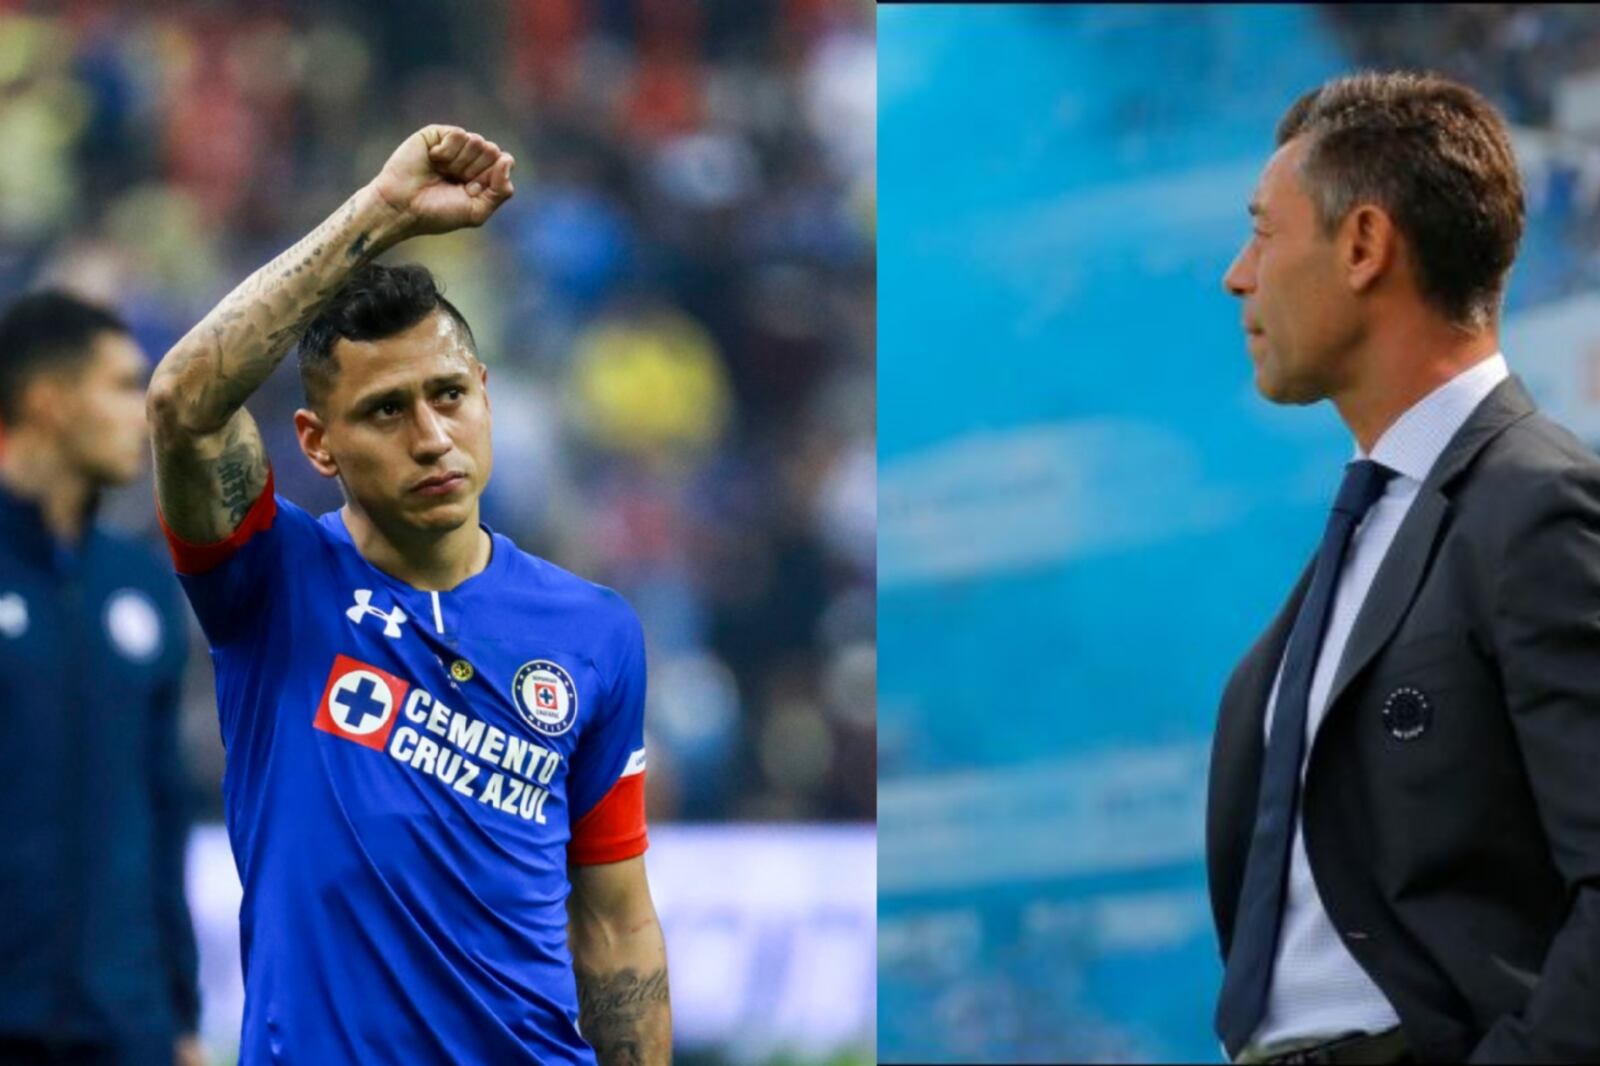 Find out who are the Cruz Azul players that Pedro Caixinha wants to take to Saudi Arabia